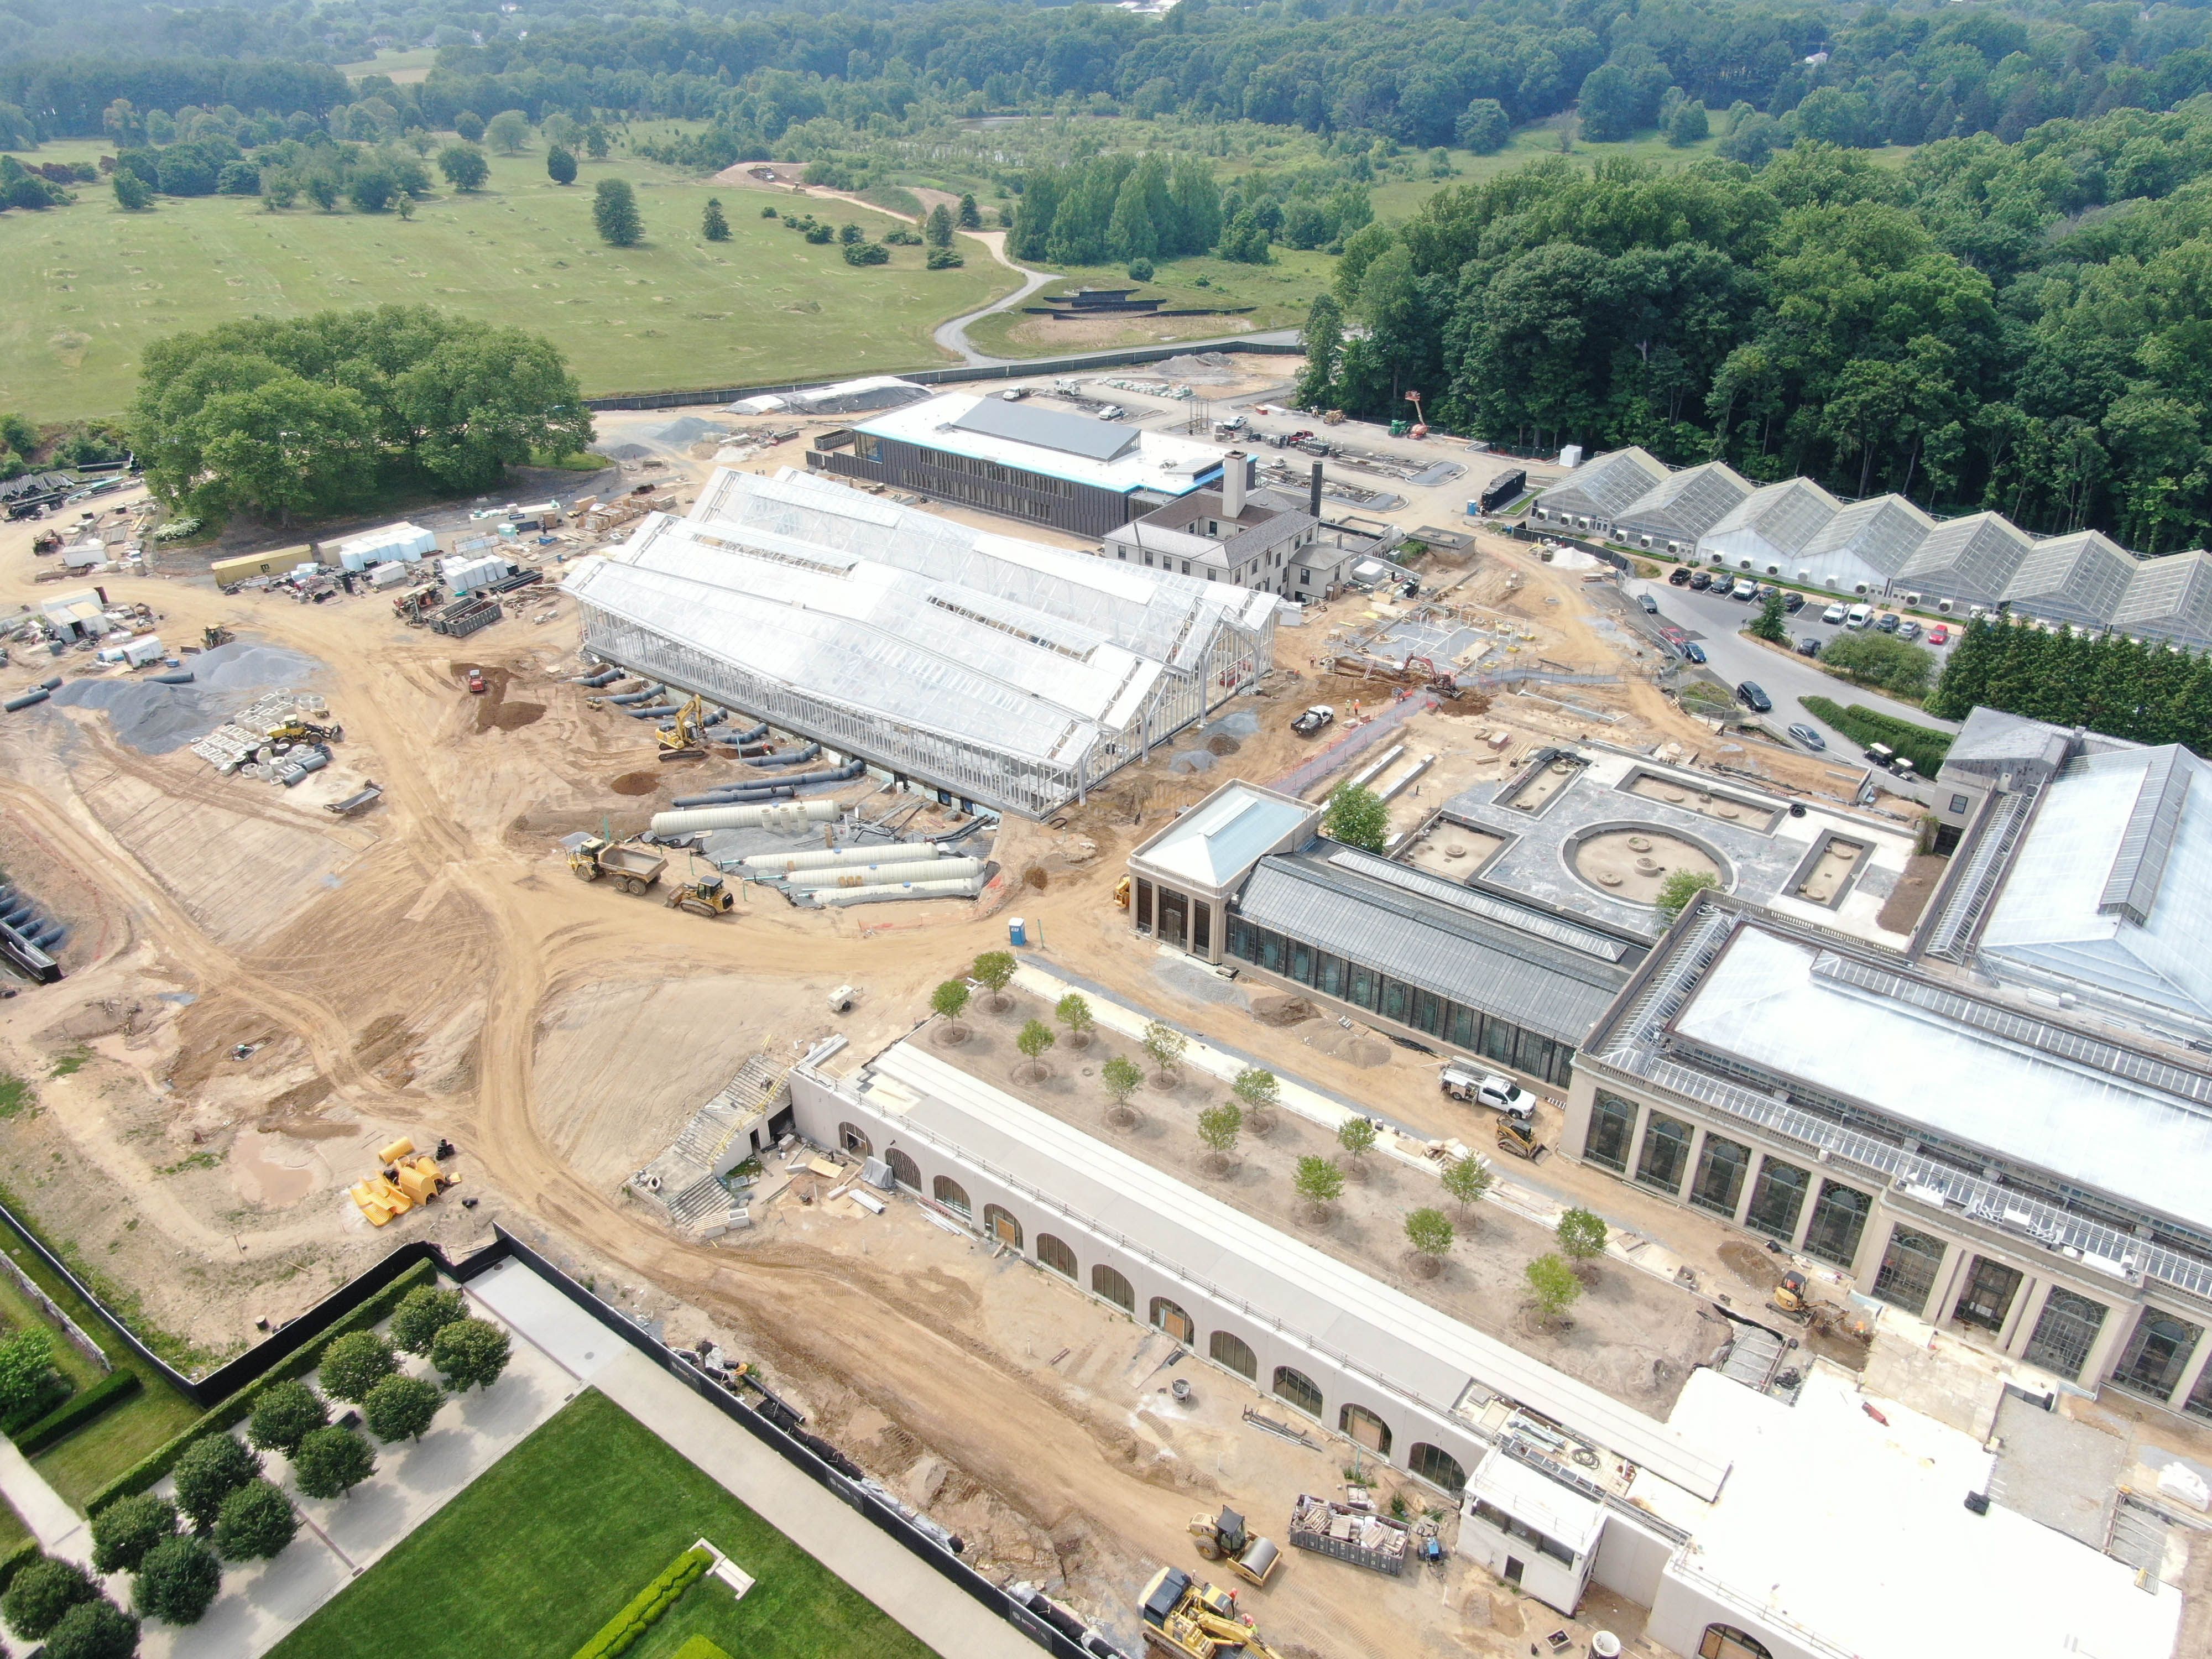 ‘Reimagined’ expansion taking shape at Longwood Gardens